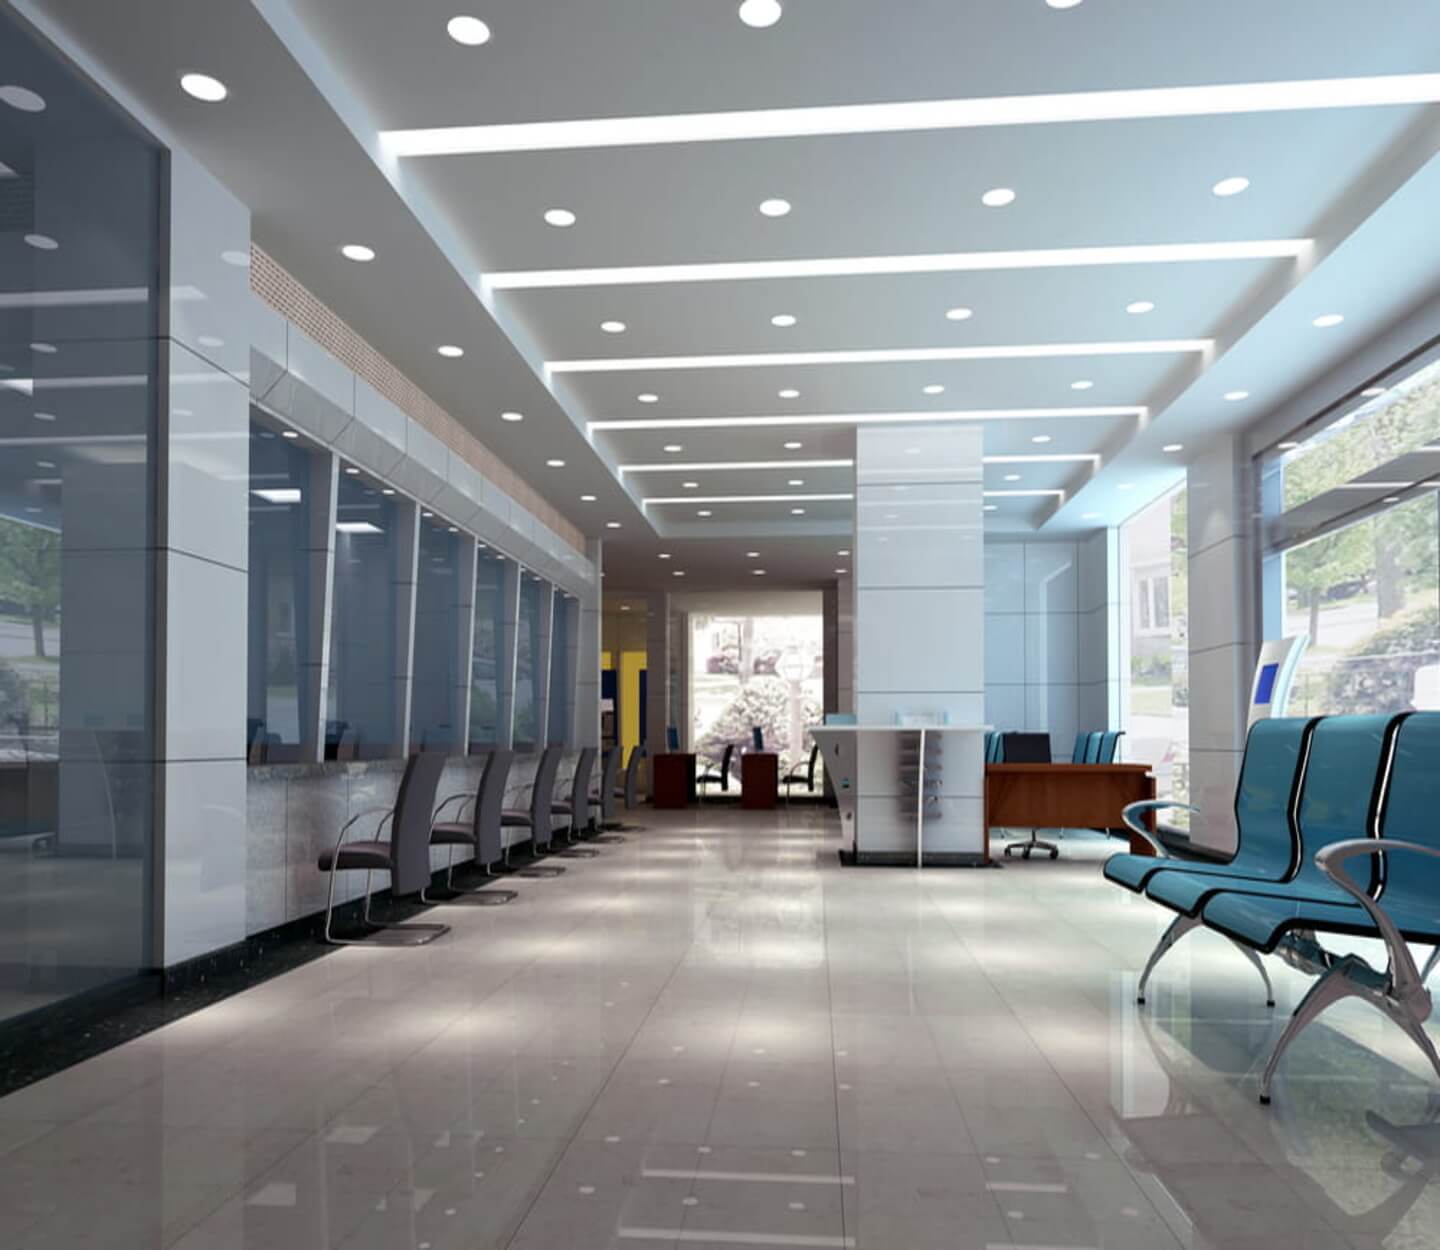 lobby waiting area with a multitude of white led light bulbs in the ceiling